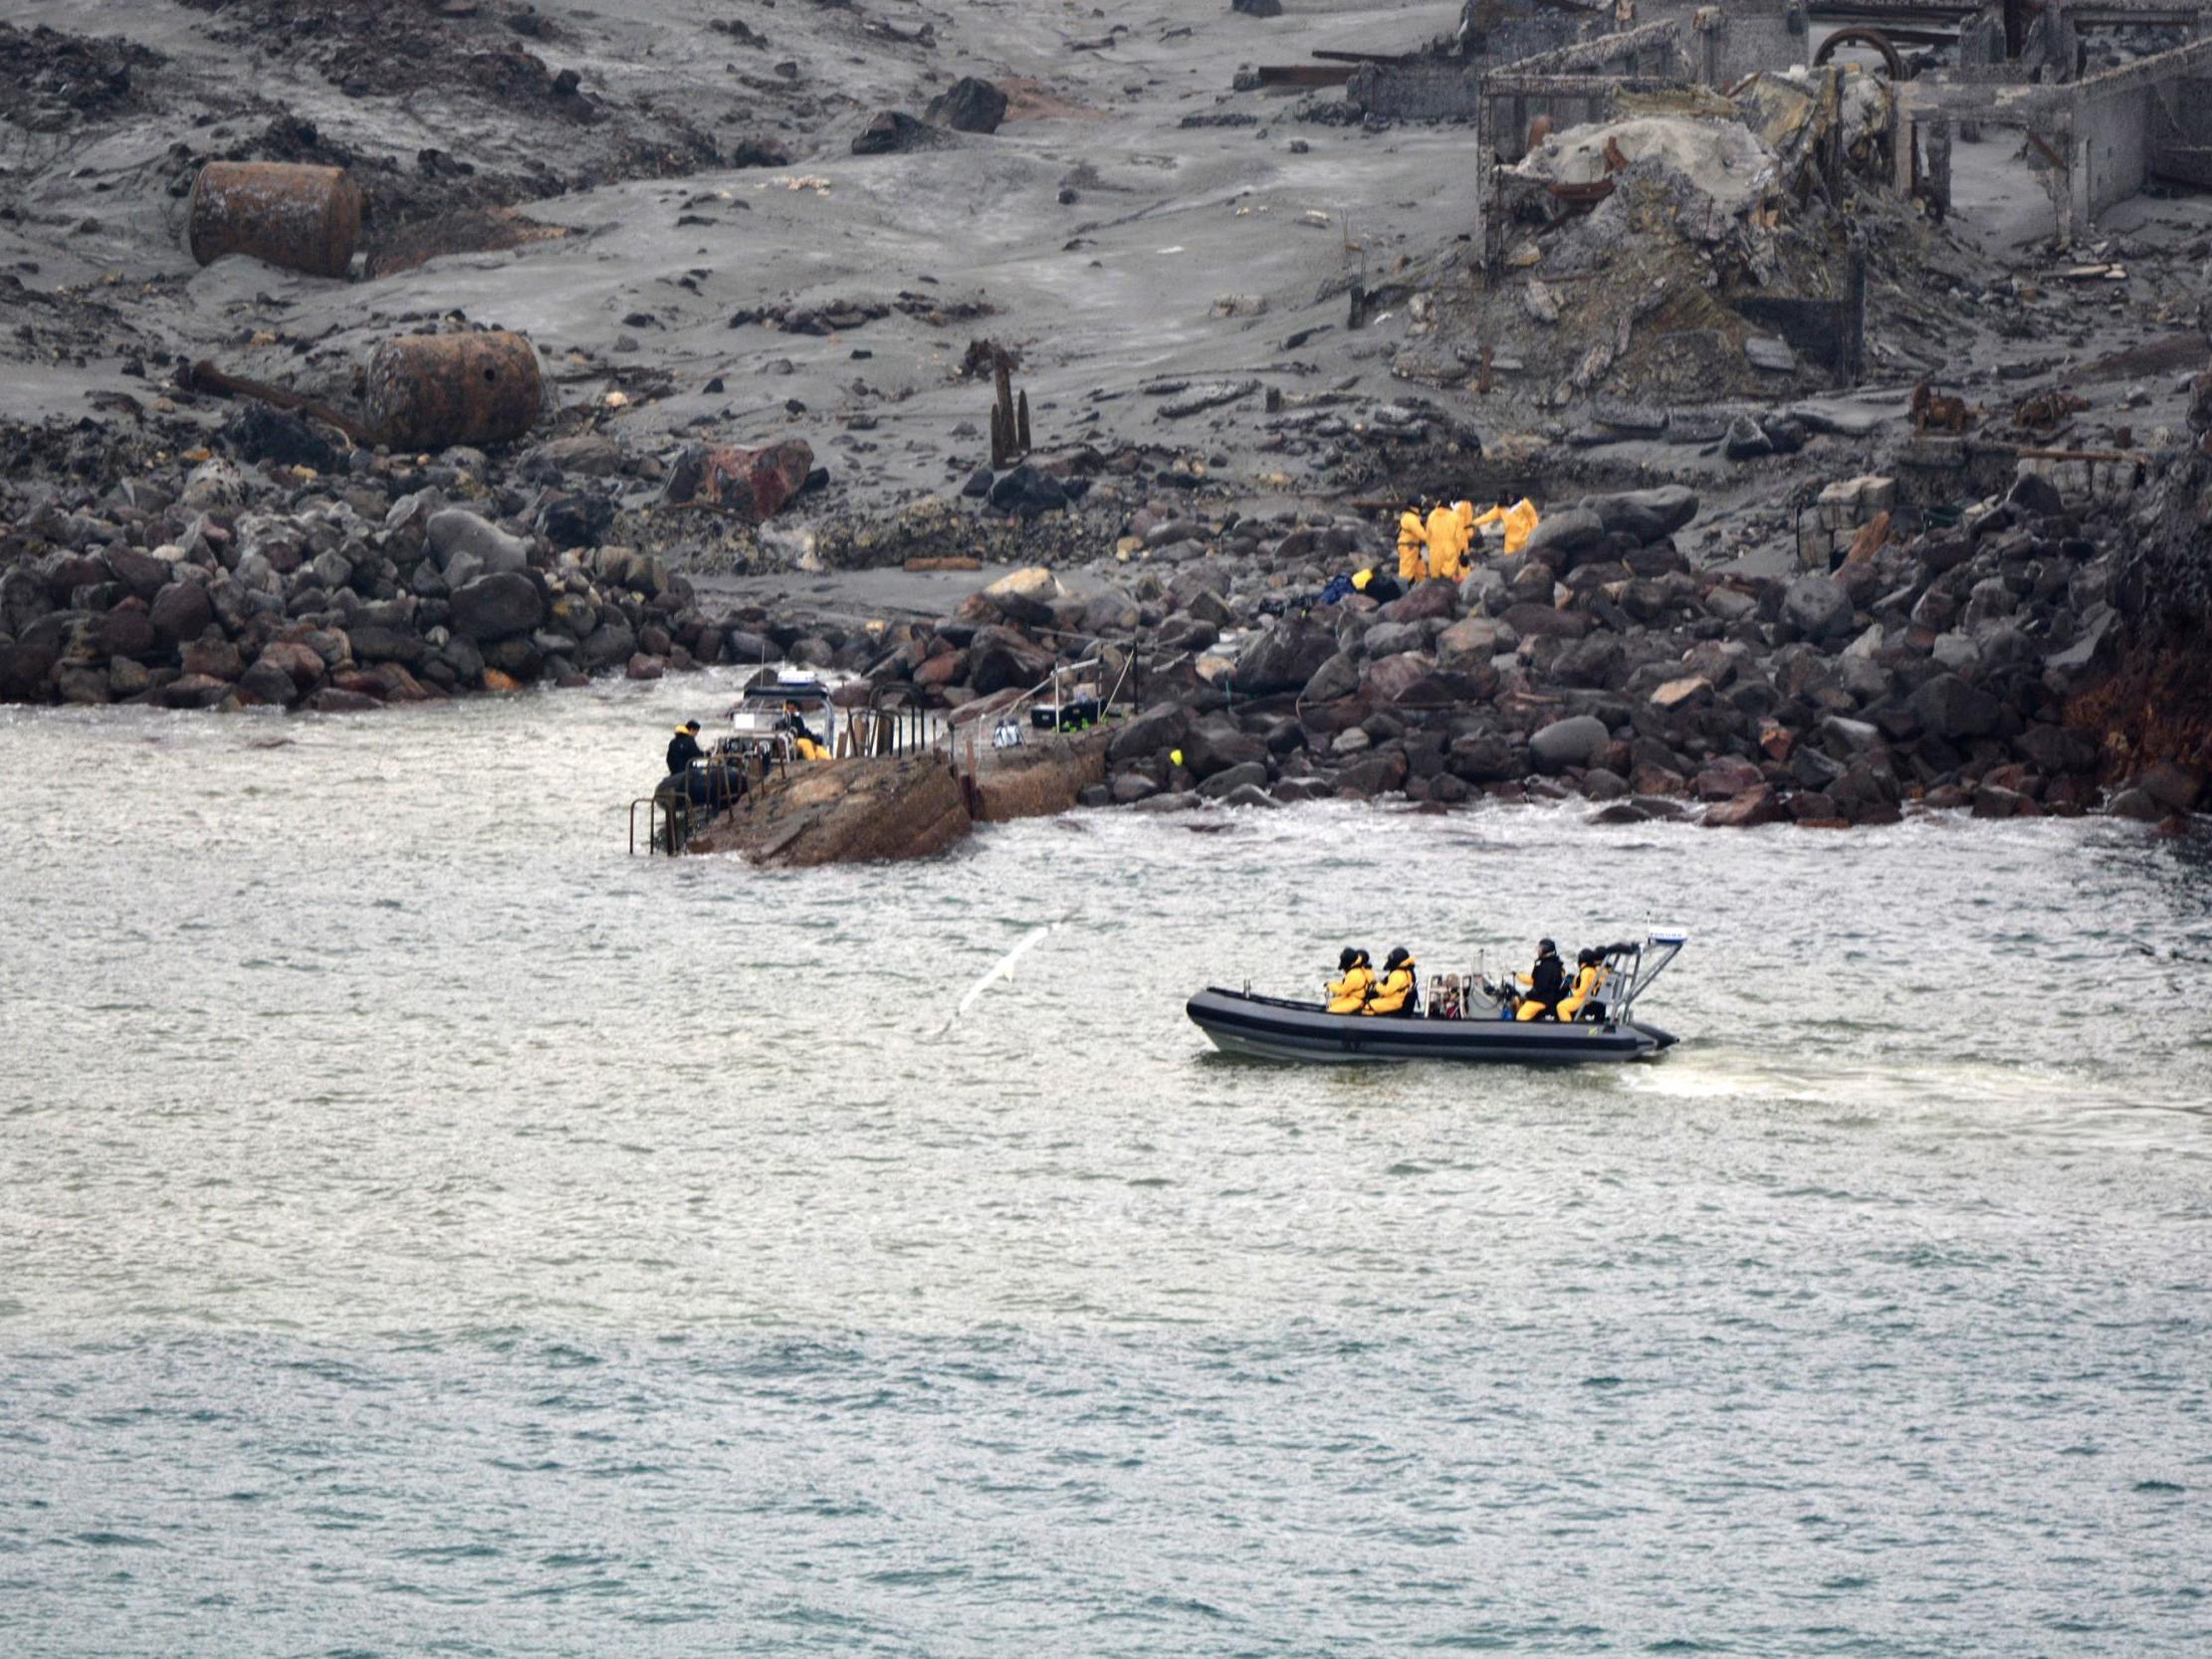 After initial delays, the White Island recovery operation got underway early on Friday morning